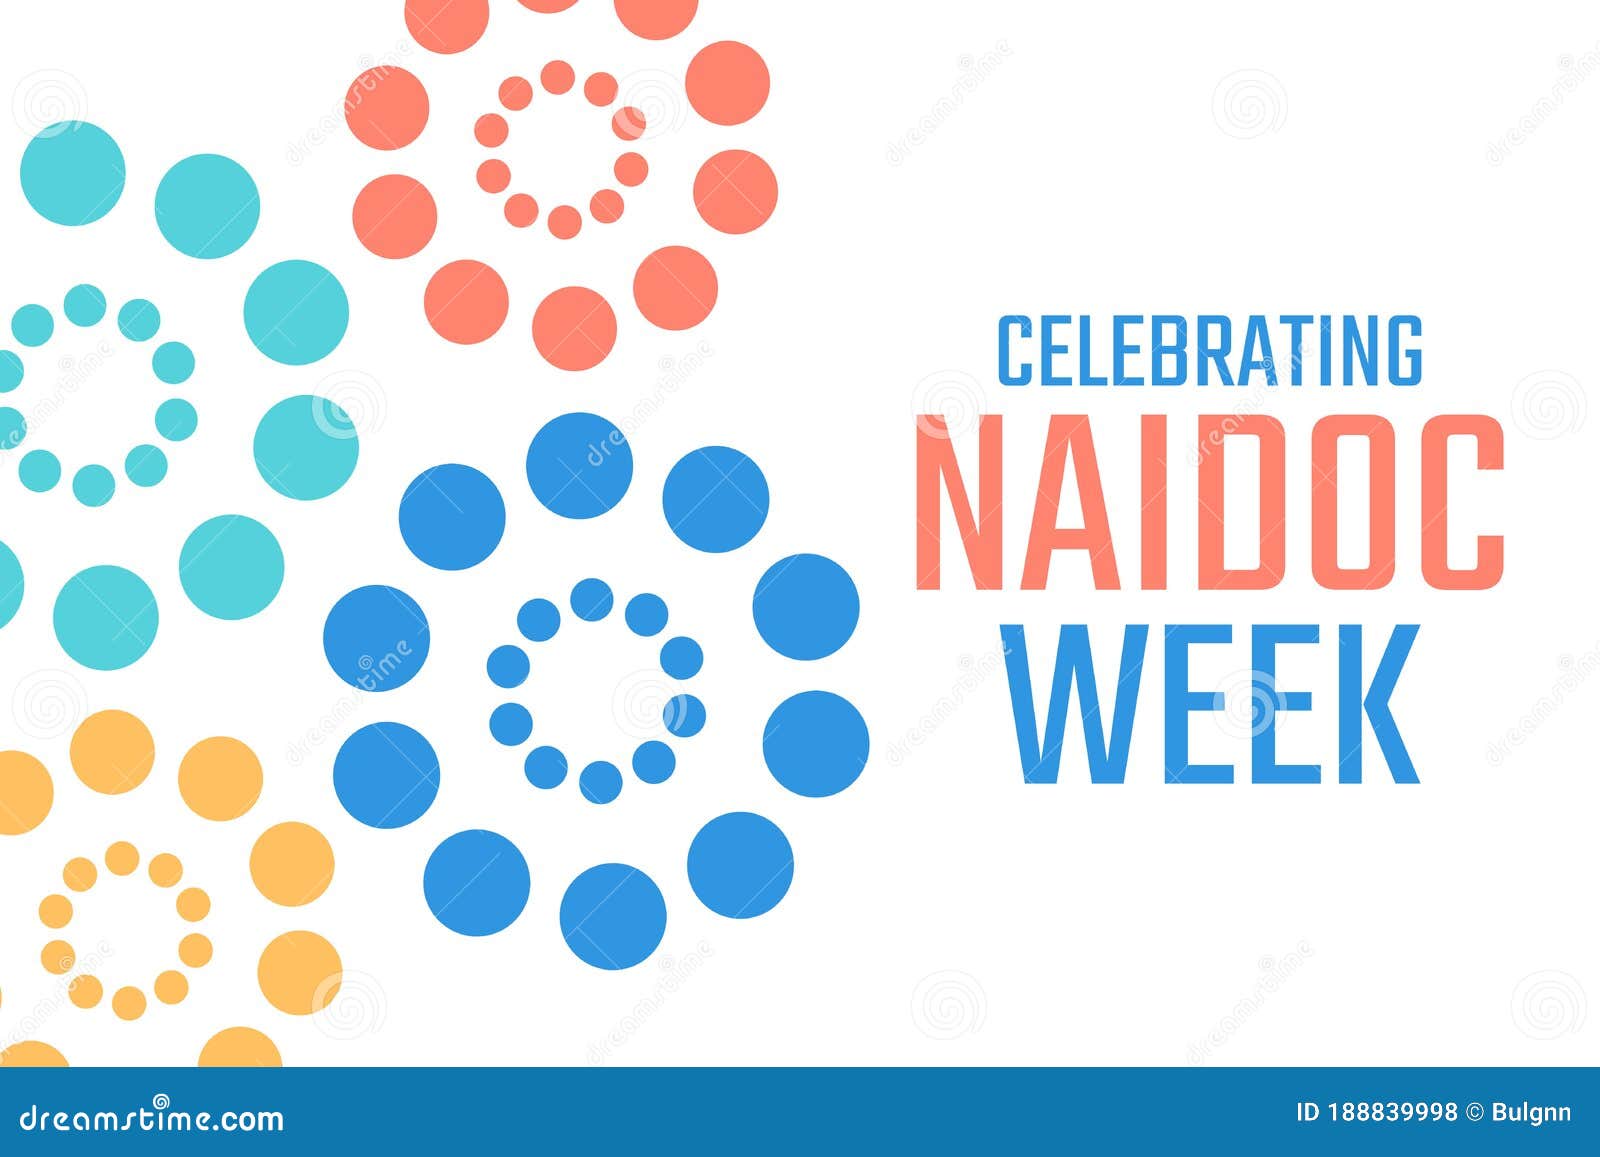 Naidoc Cartoons Illustrations And Vector Stock Images 36 Pictures To